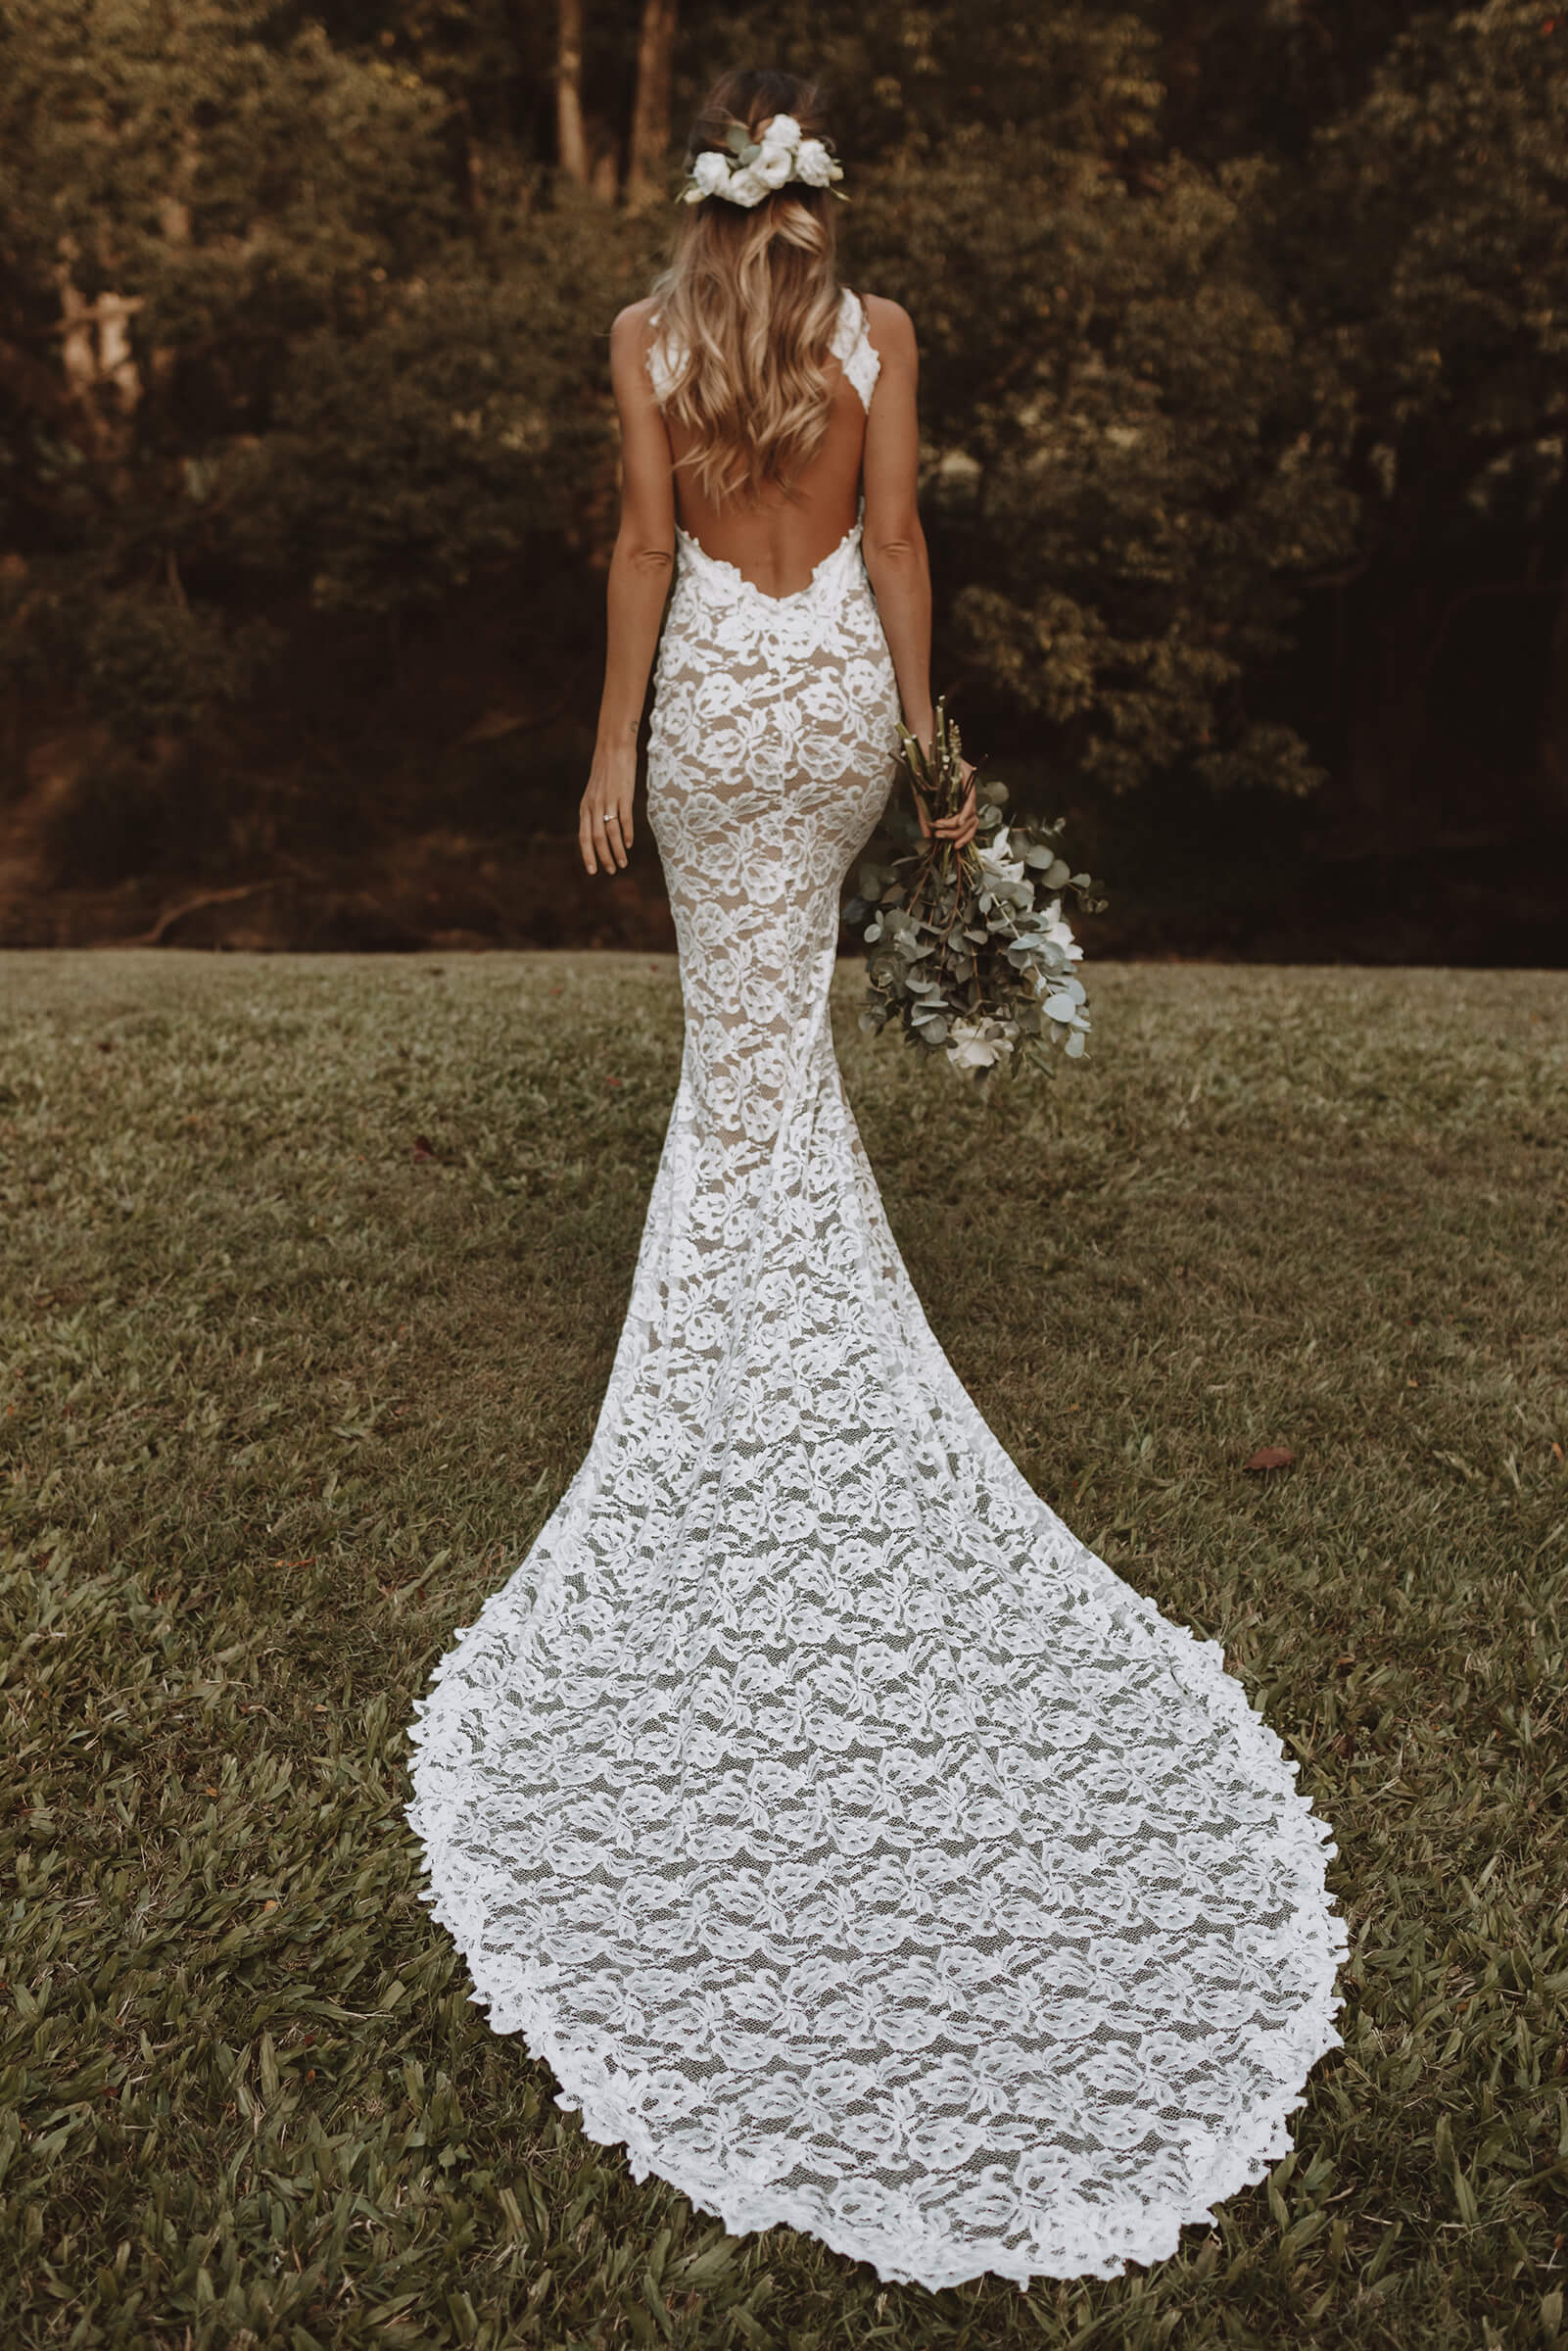 A Q&A with the fabulous Made with Love | LOVE Bridal Boutique